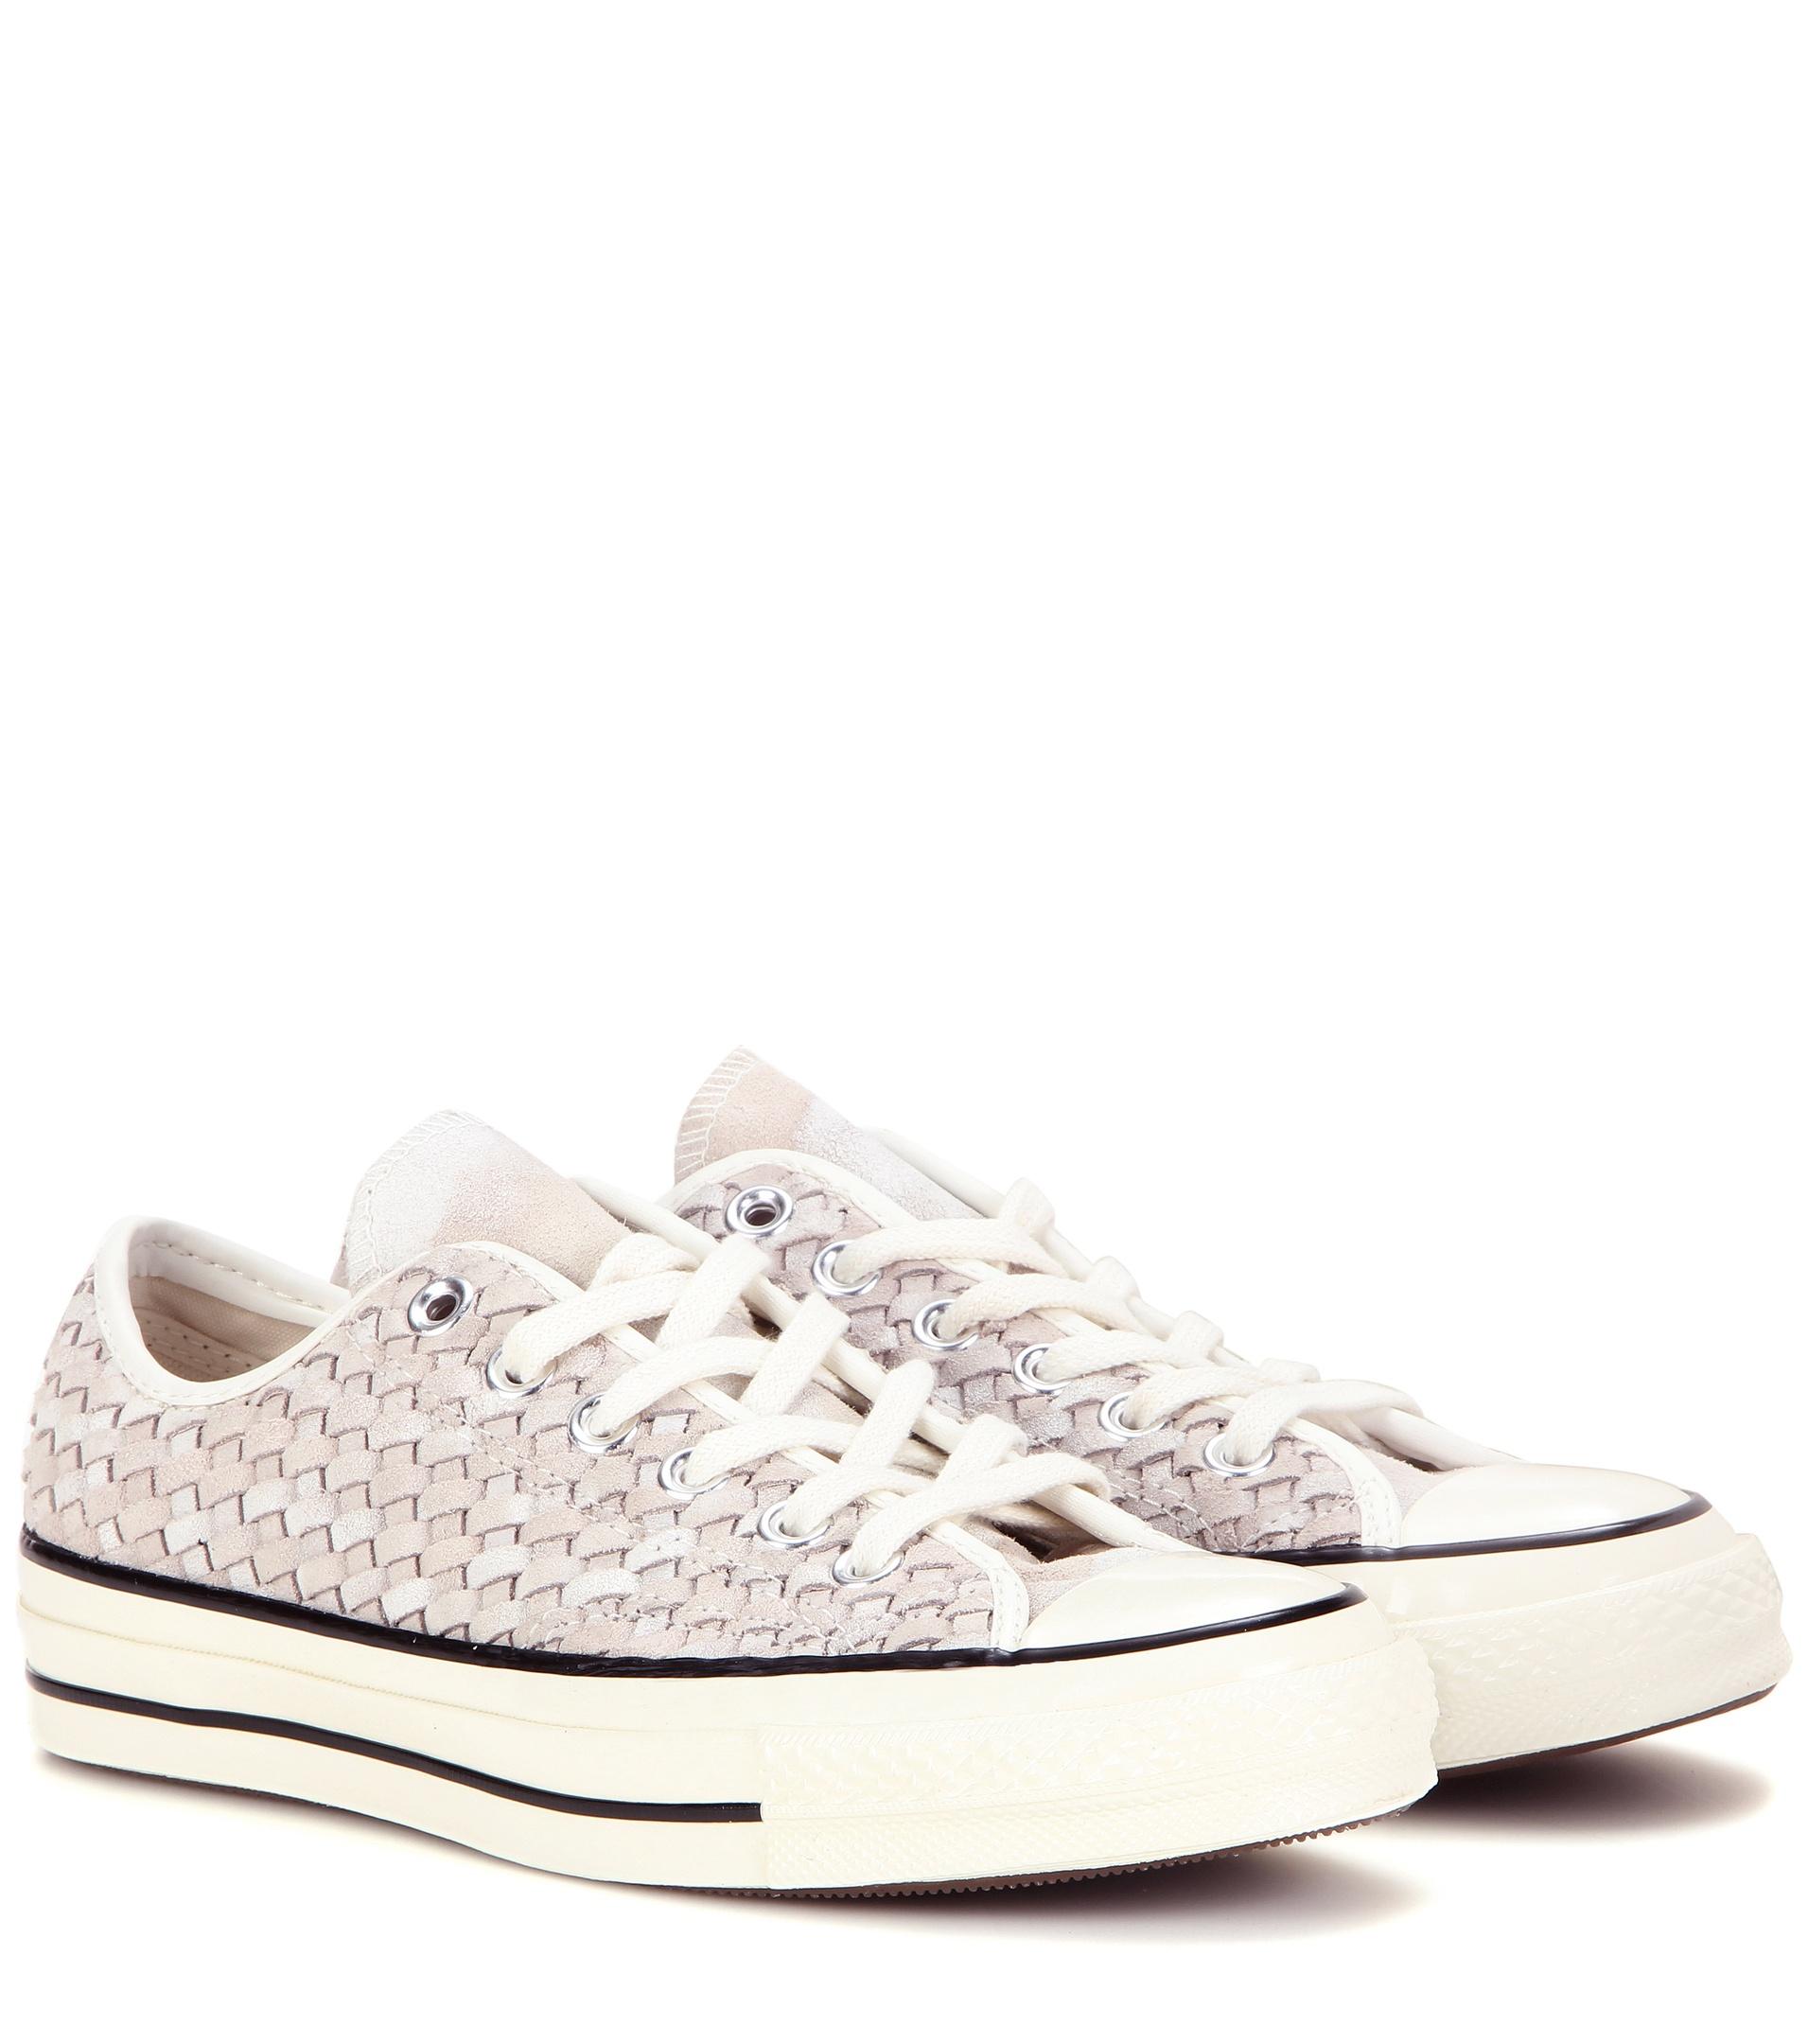 Converse Chuck Taylor All Star 70 Suede Sneakers in Gray - Lyst